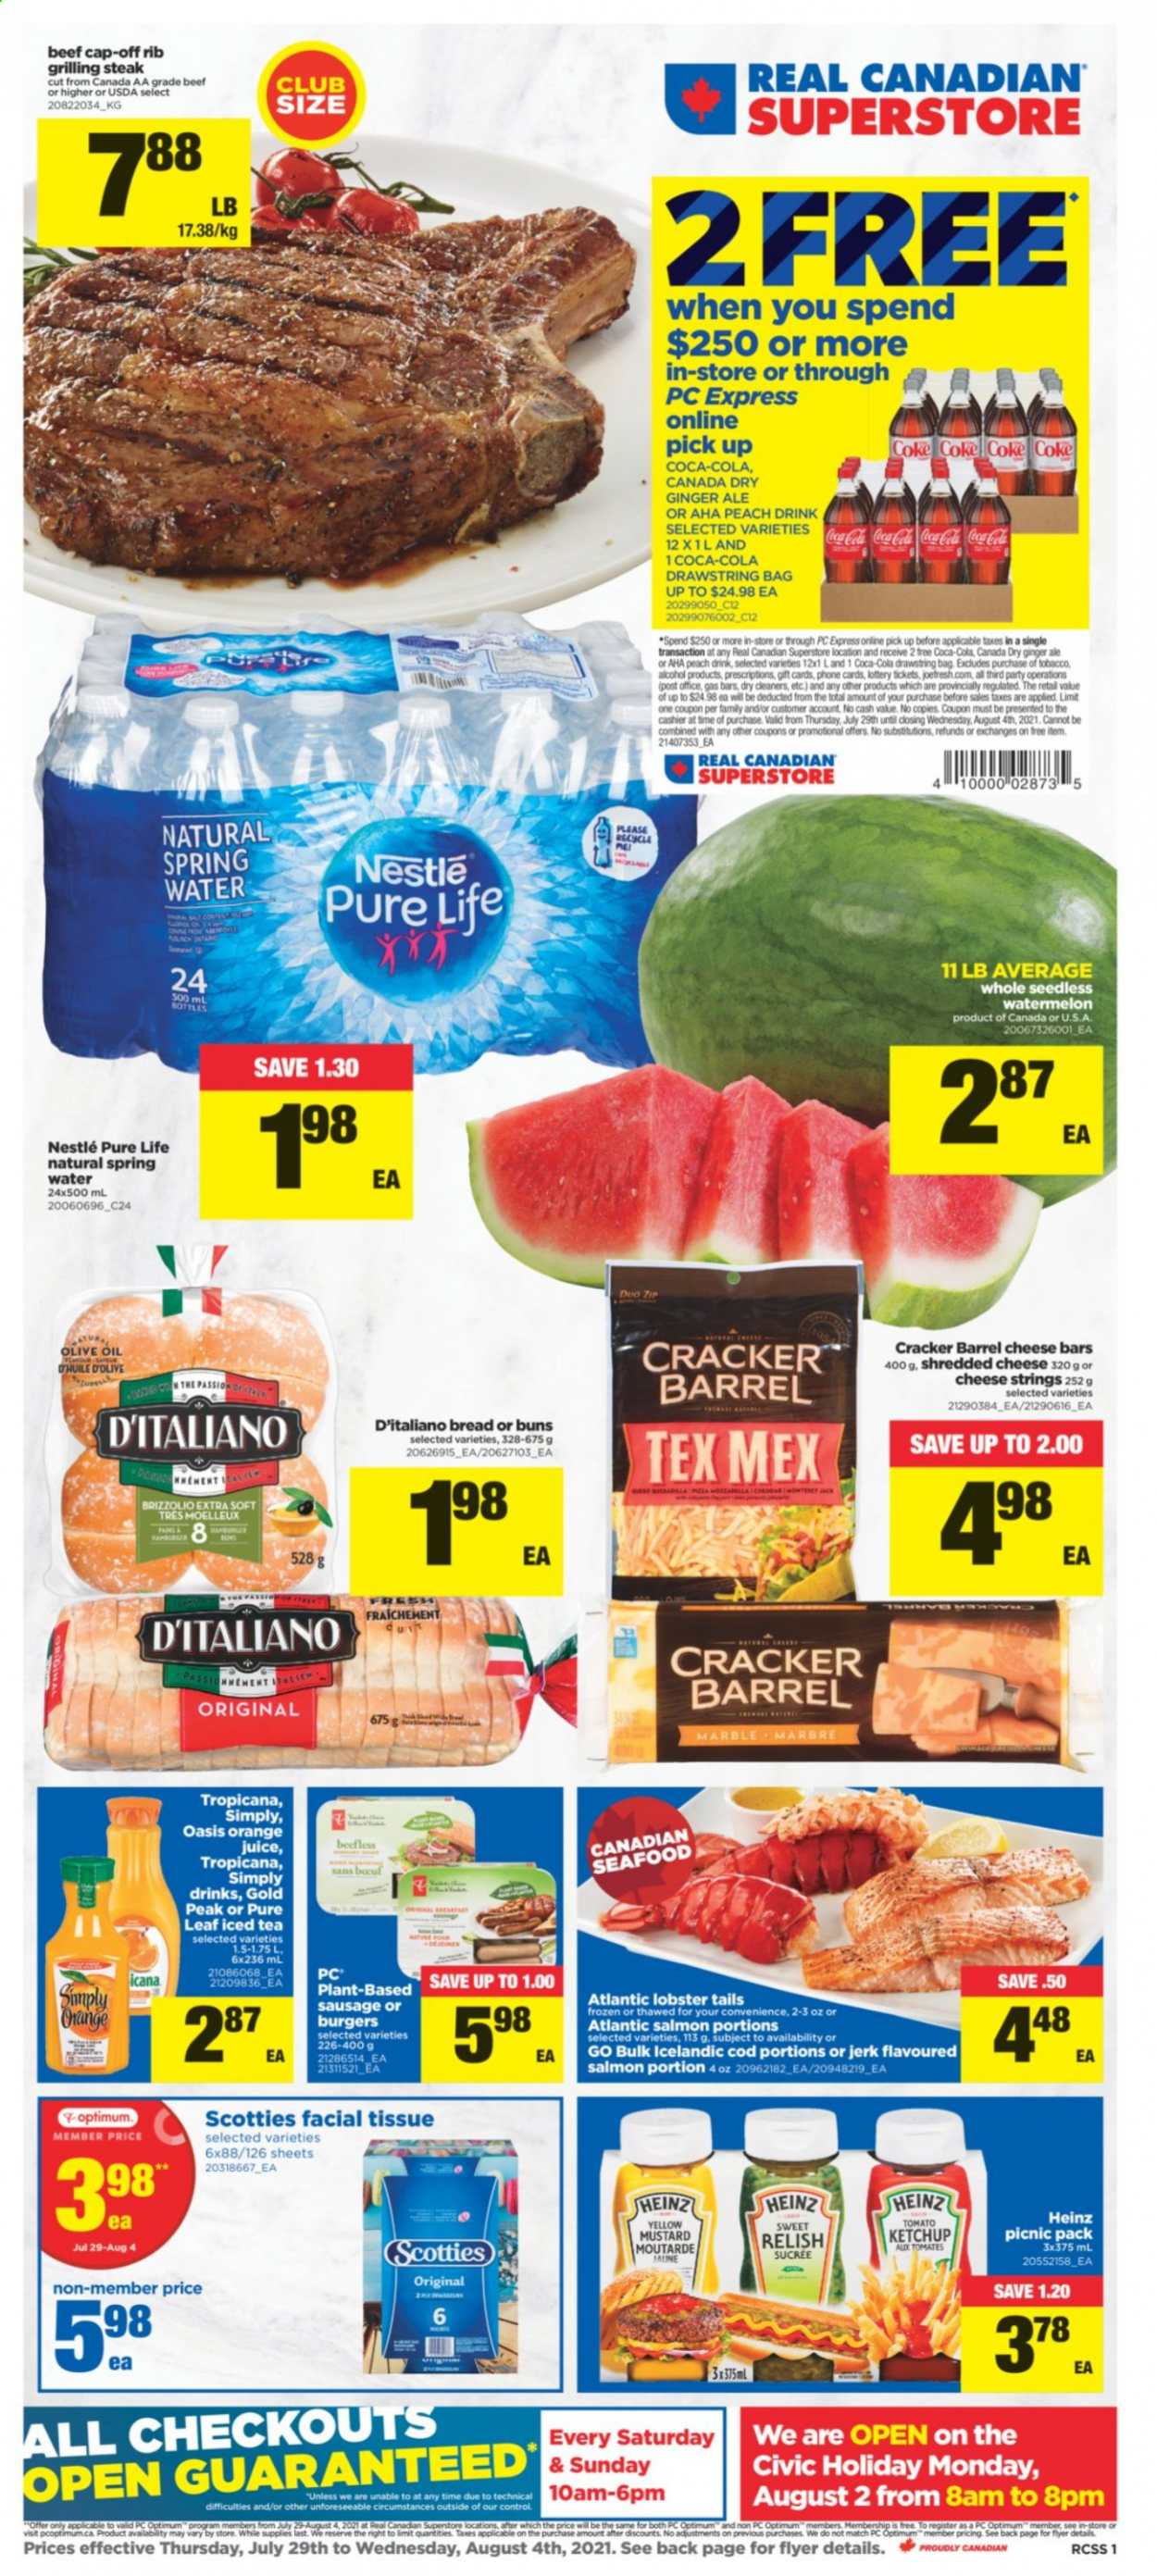 thumbnail - Real Canadian Superstore Flyer - July 29, 2021 - August 04, 2021 - Sales products - bread, buns, watermelon, cod, lobster, salmon, seafood, lobster tail, sausage, shredded cheese, crackers, Heinz, mustard, olive oil, oil, Canada Dry, Coca-Cola, ginger ale, orange juice, juice, ice tea, spring water, Pure Leaf, alcohol, tissues, Optimum, Nestlé, steak. Page 1.